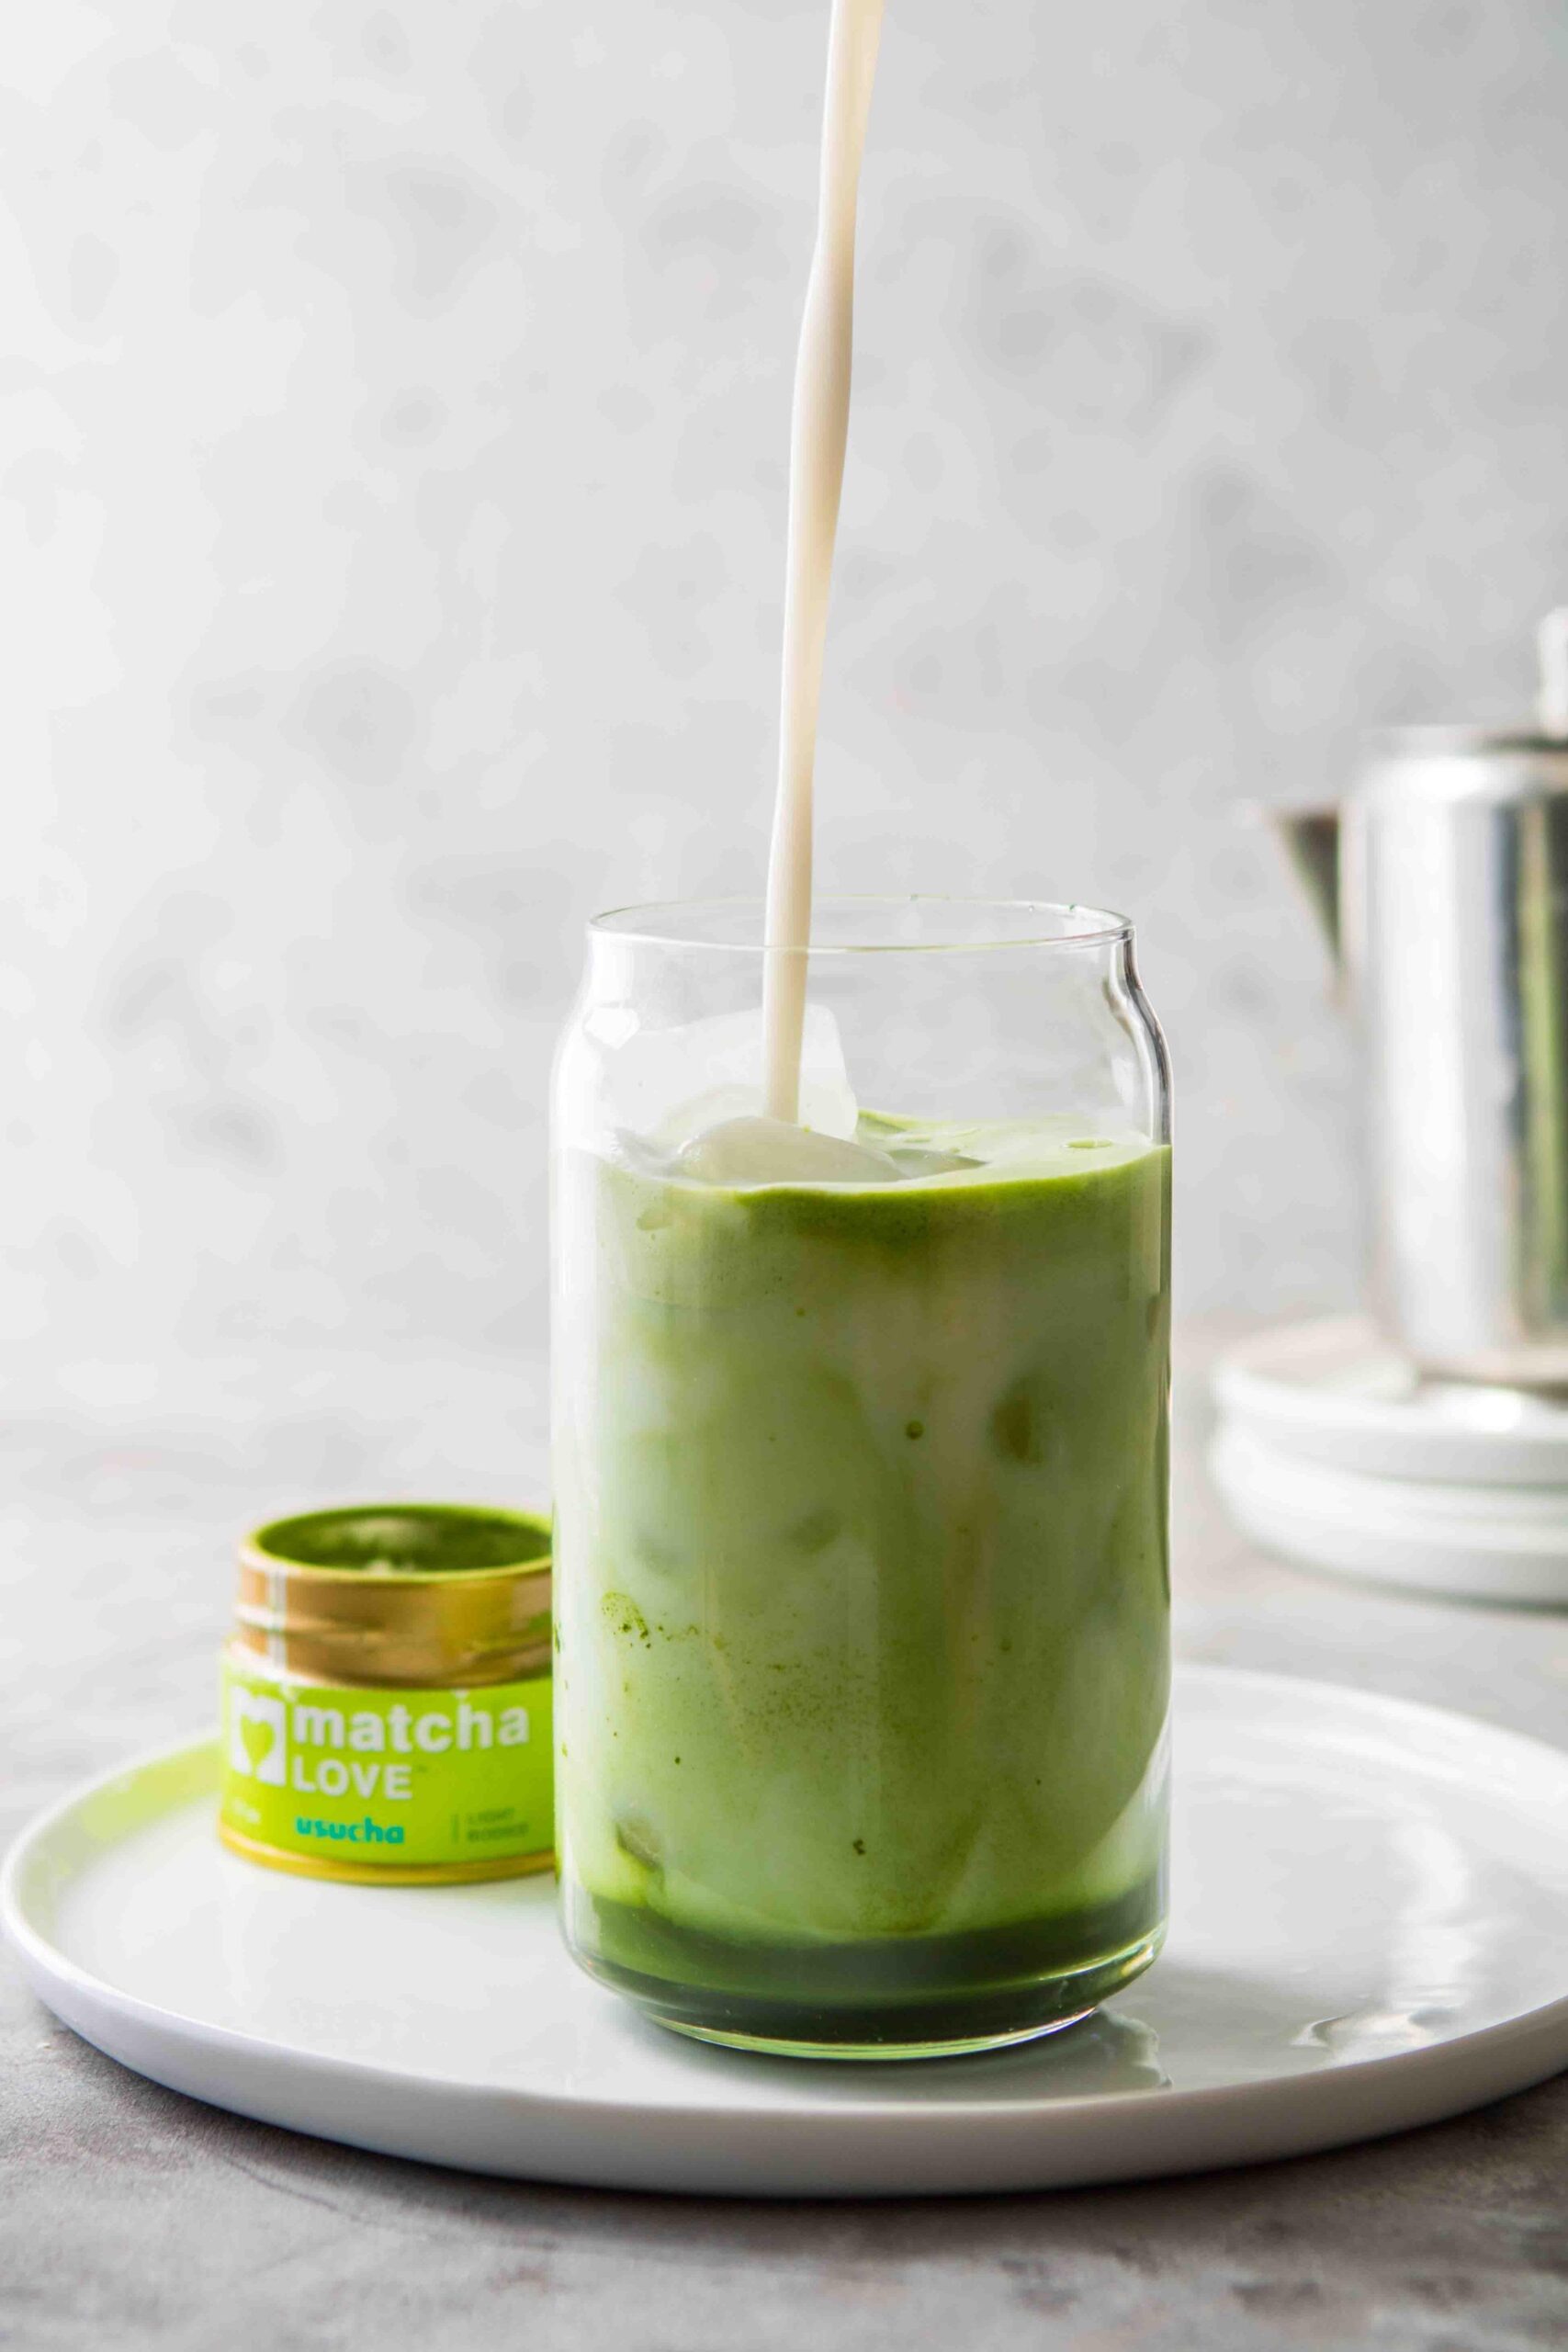  This matcha latte is the perfect pick-me-up.